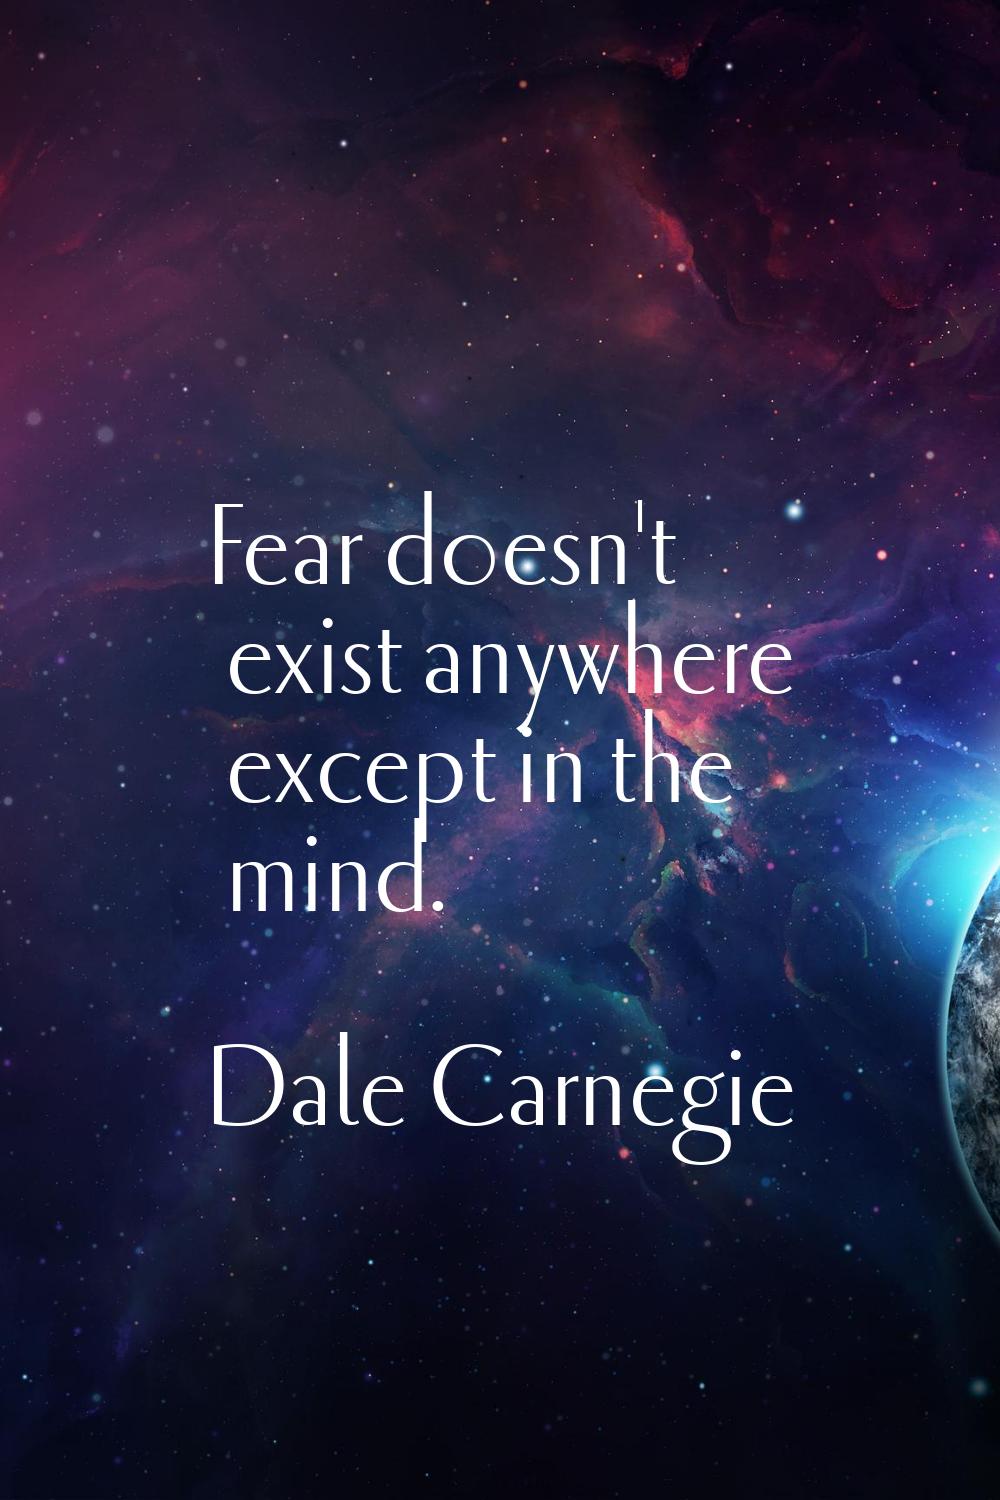 Fear doesn't exist anywhere except in the mind.